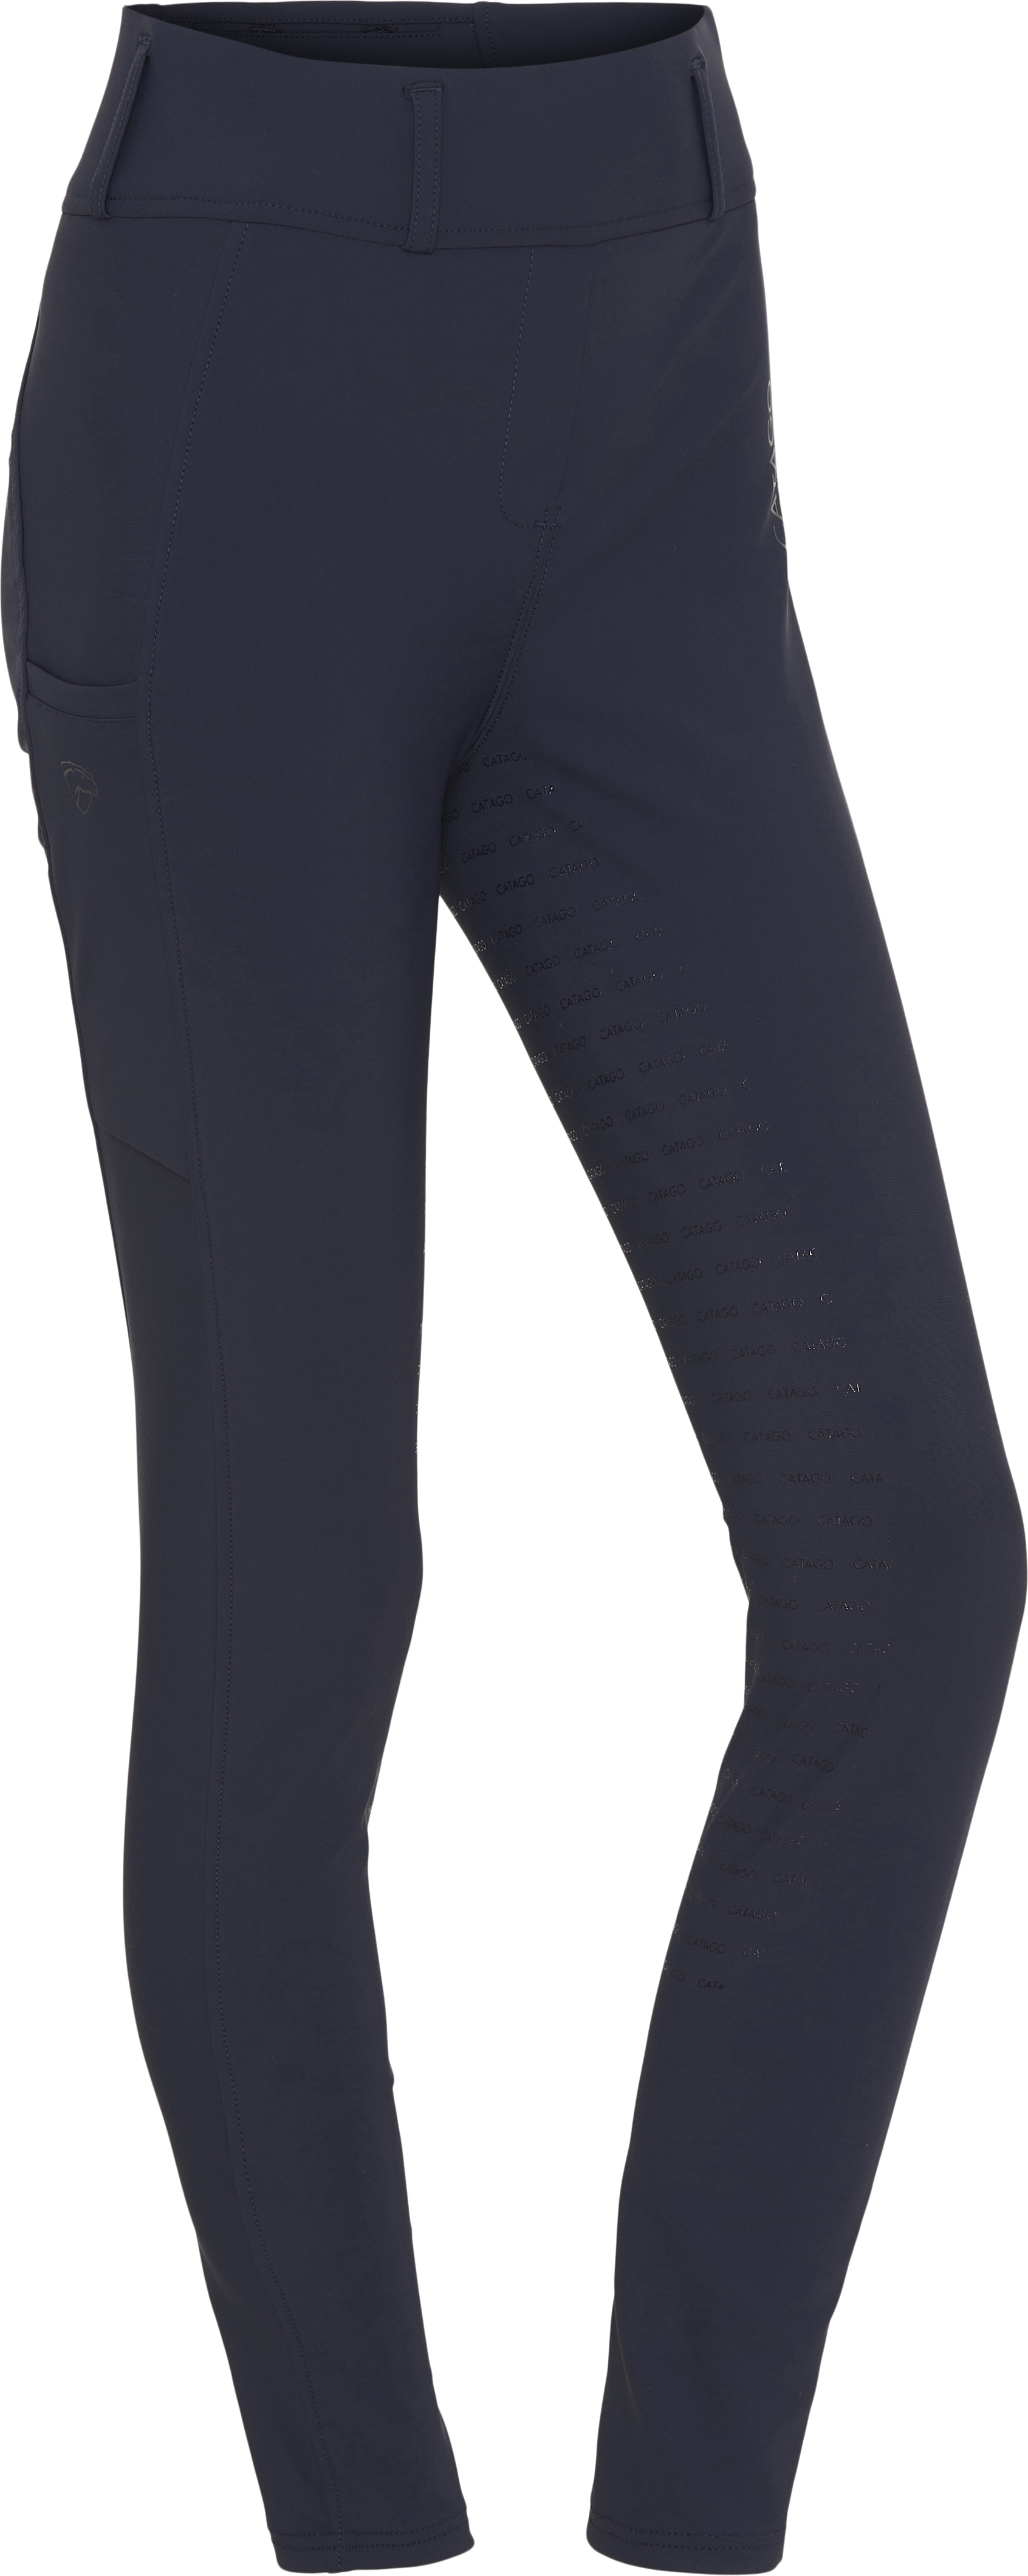 CATAGO River Tights Fullgrip With Belt Loops - Navy (M), Catago